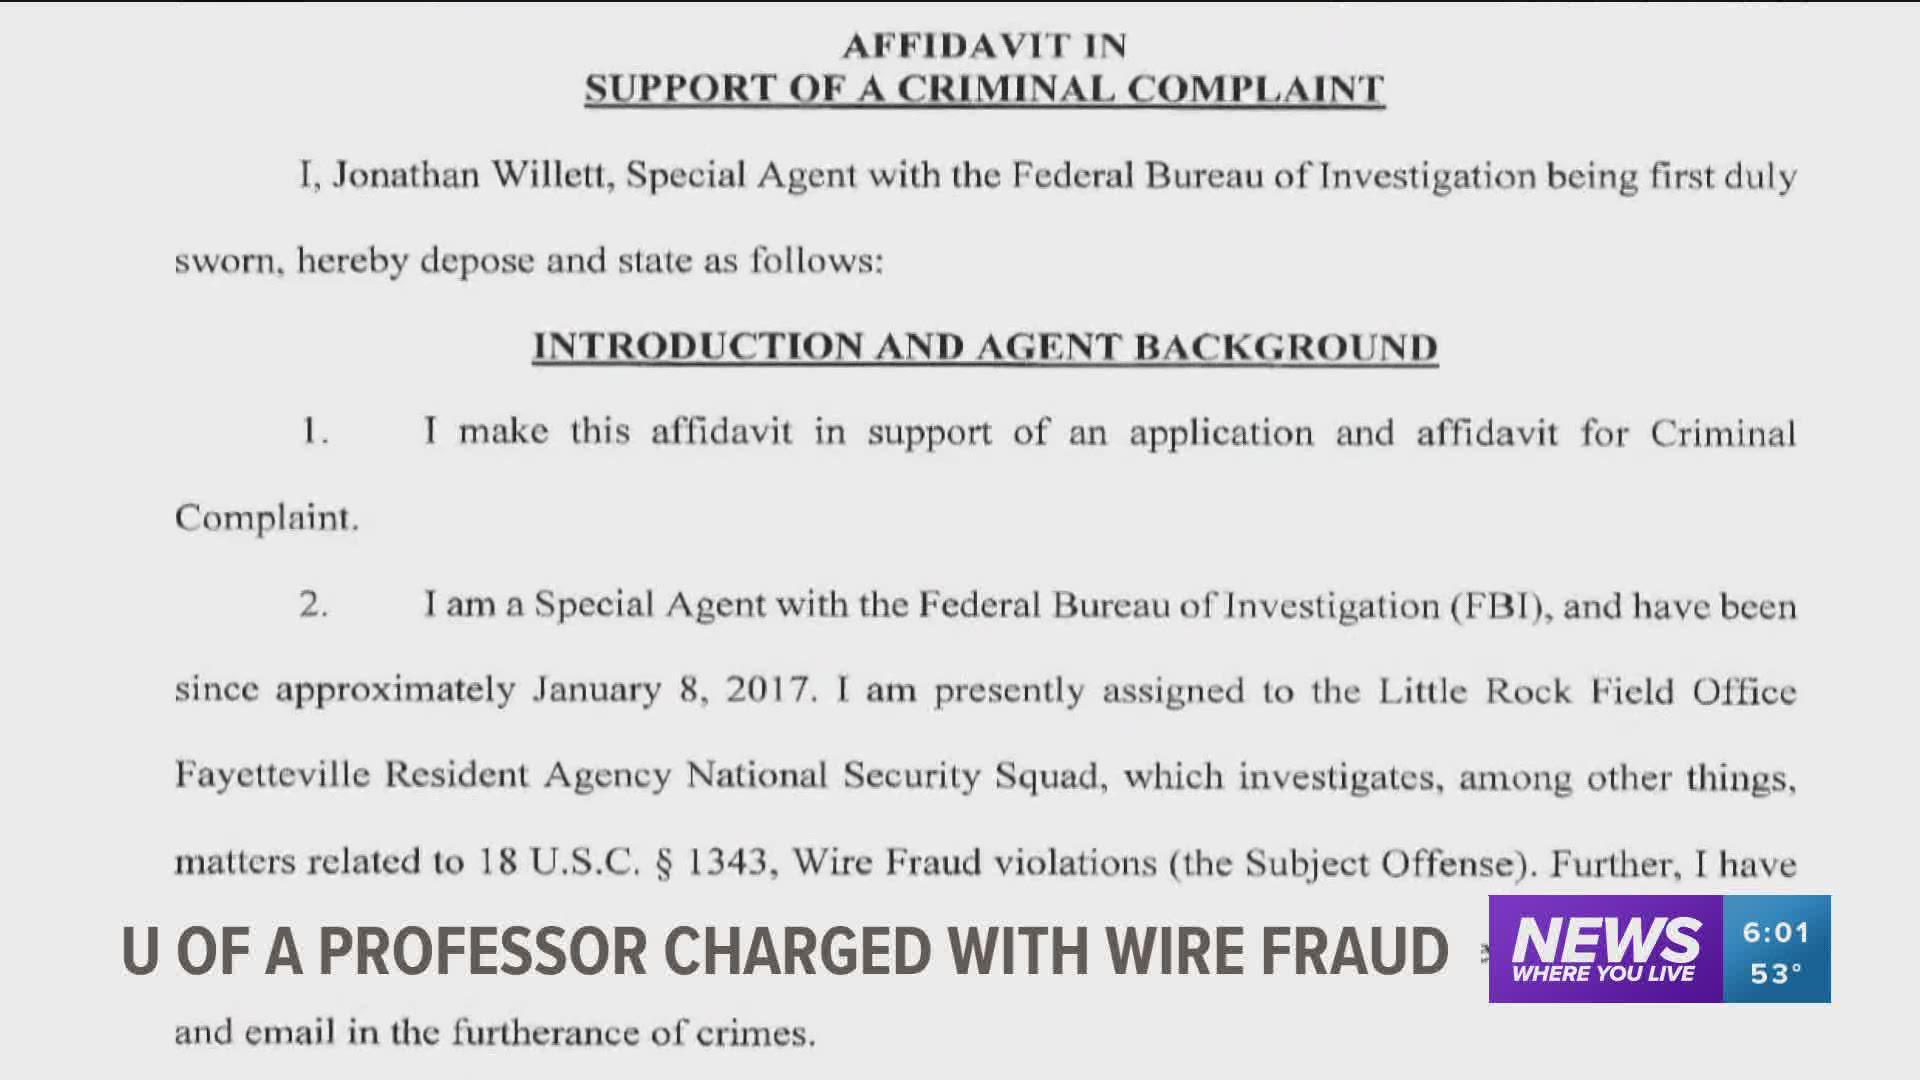 UA professor charged with wire fraud